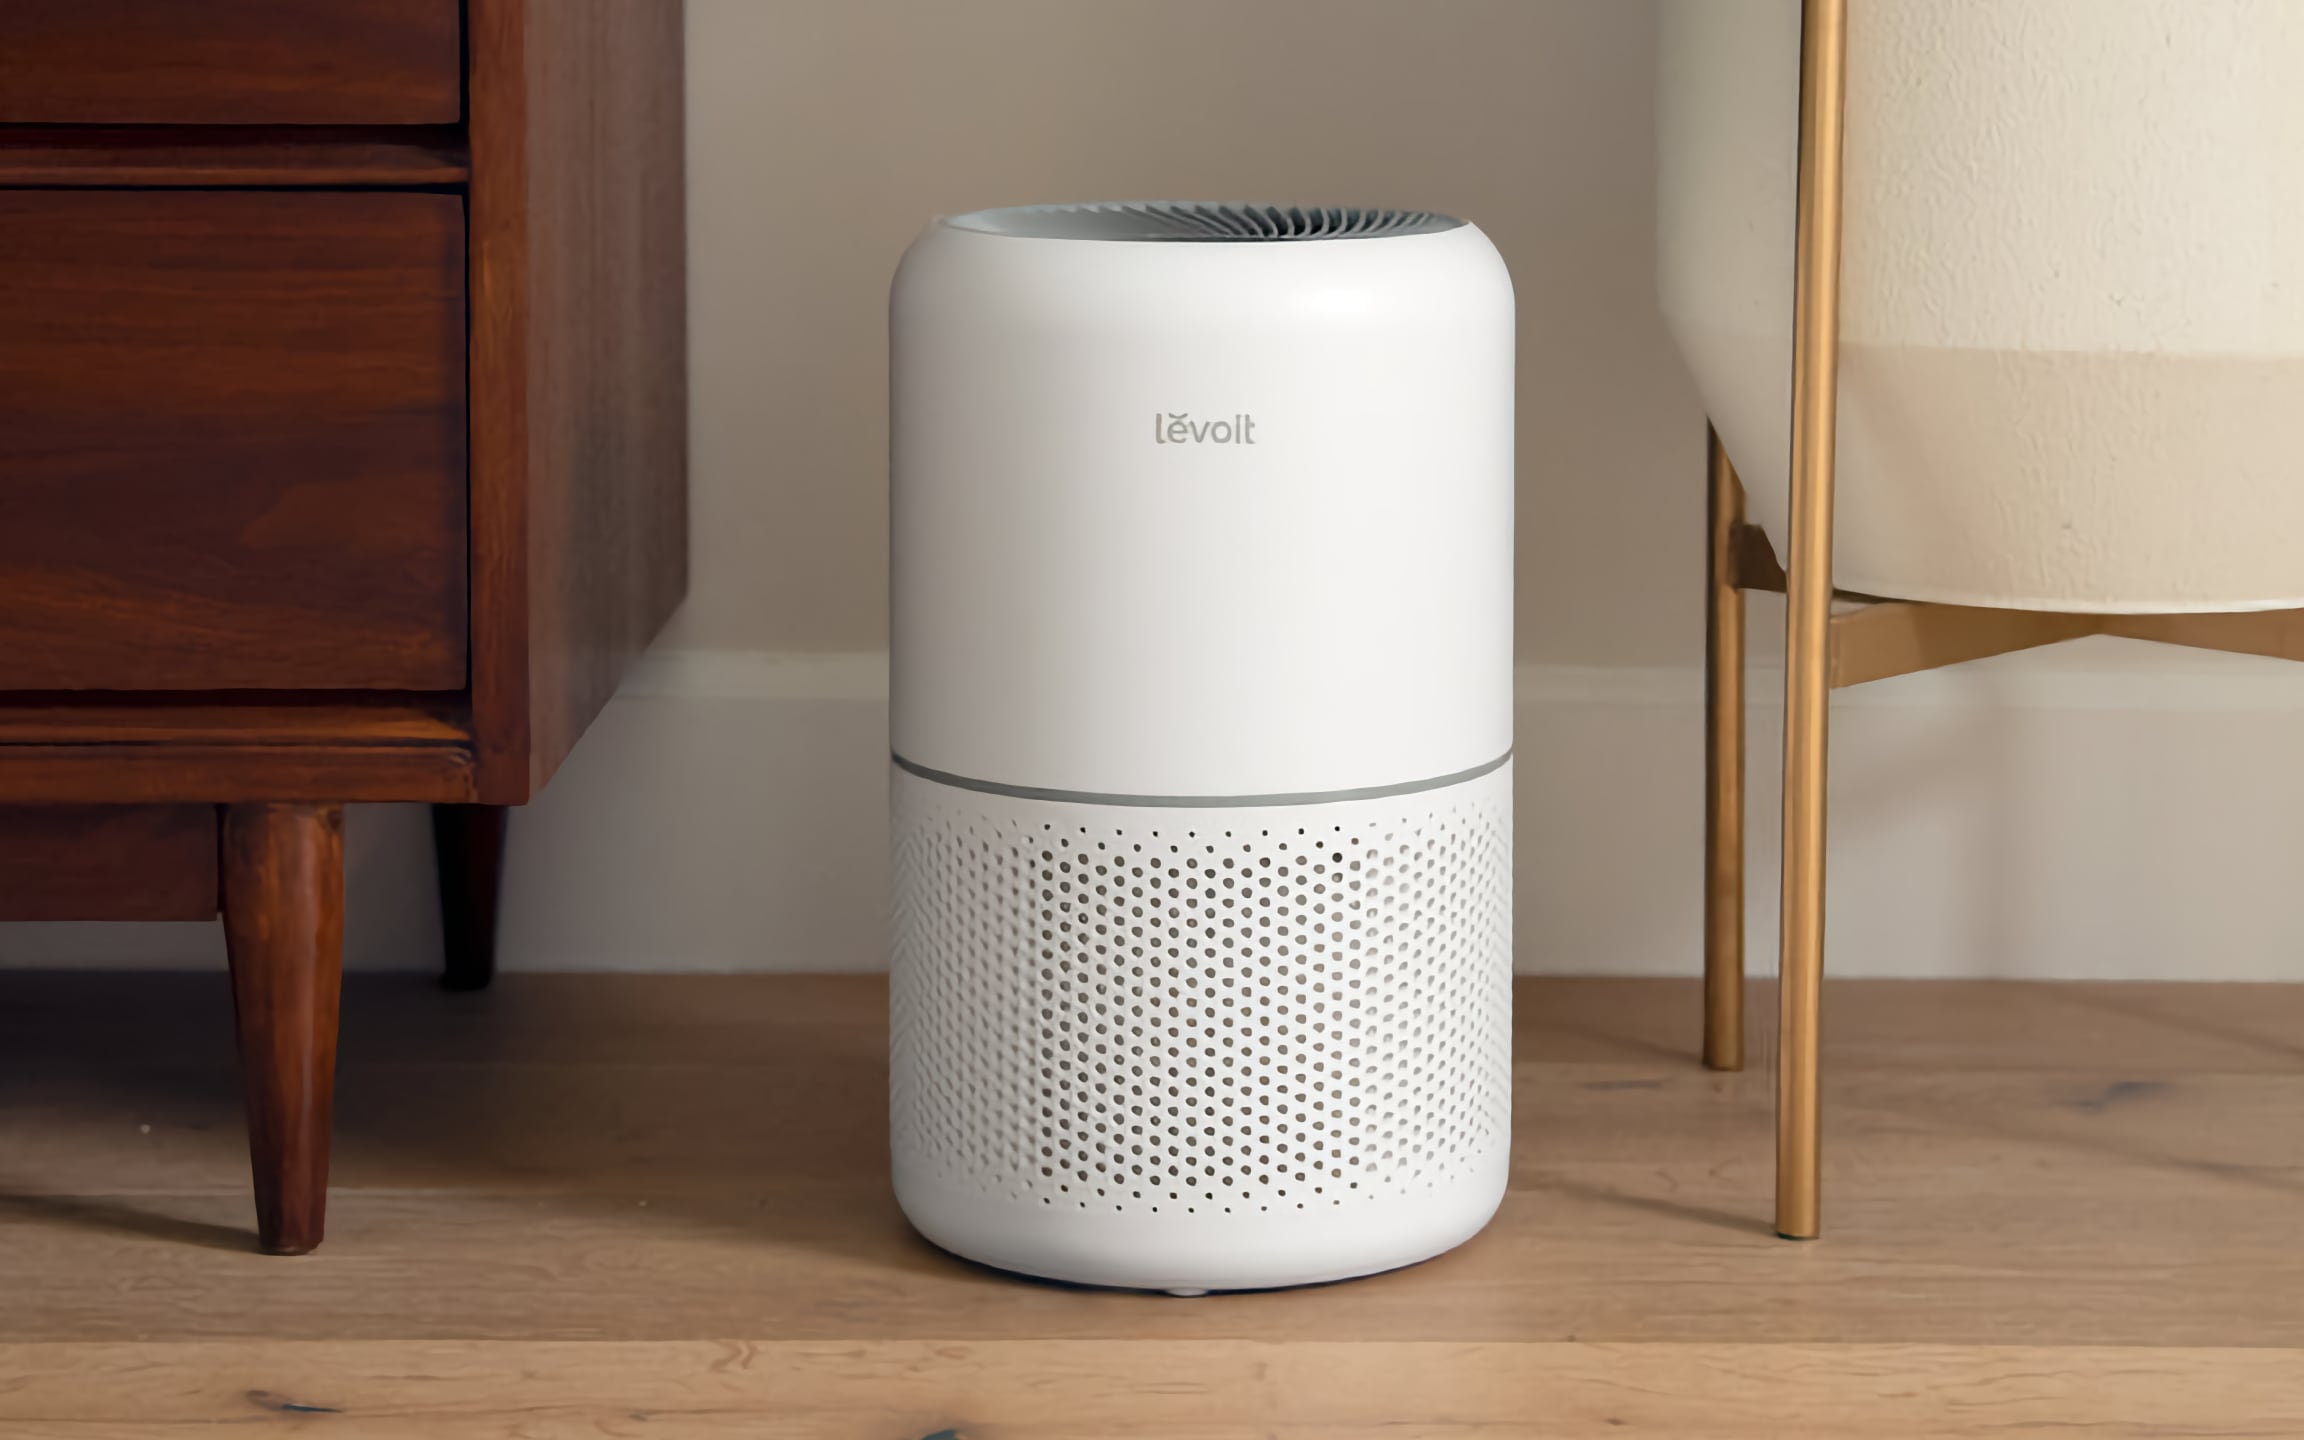 Get better at home with this purifier